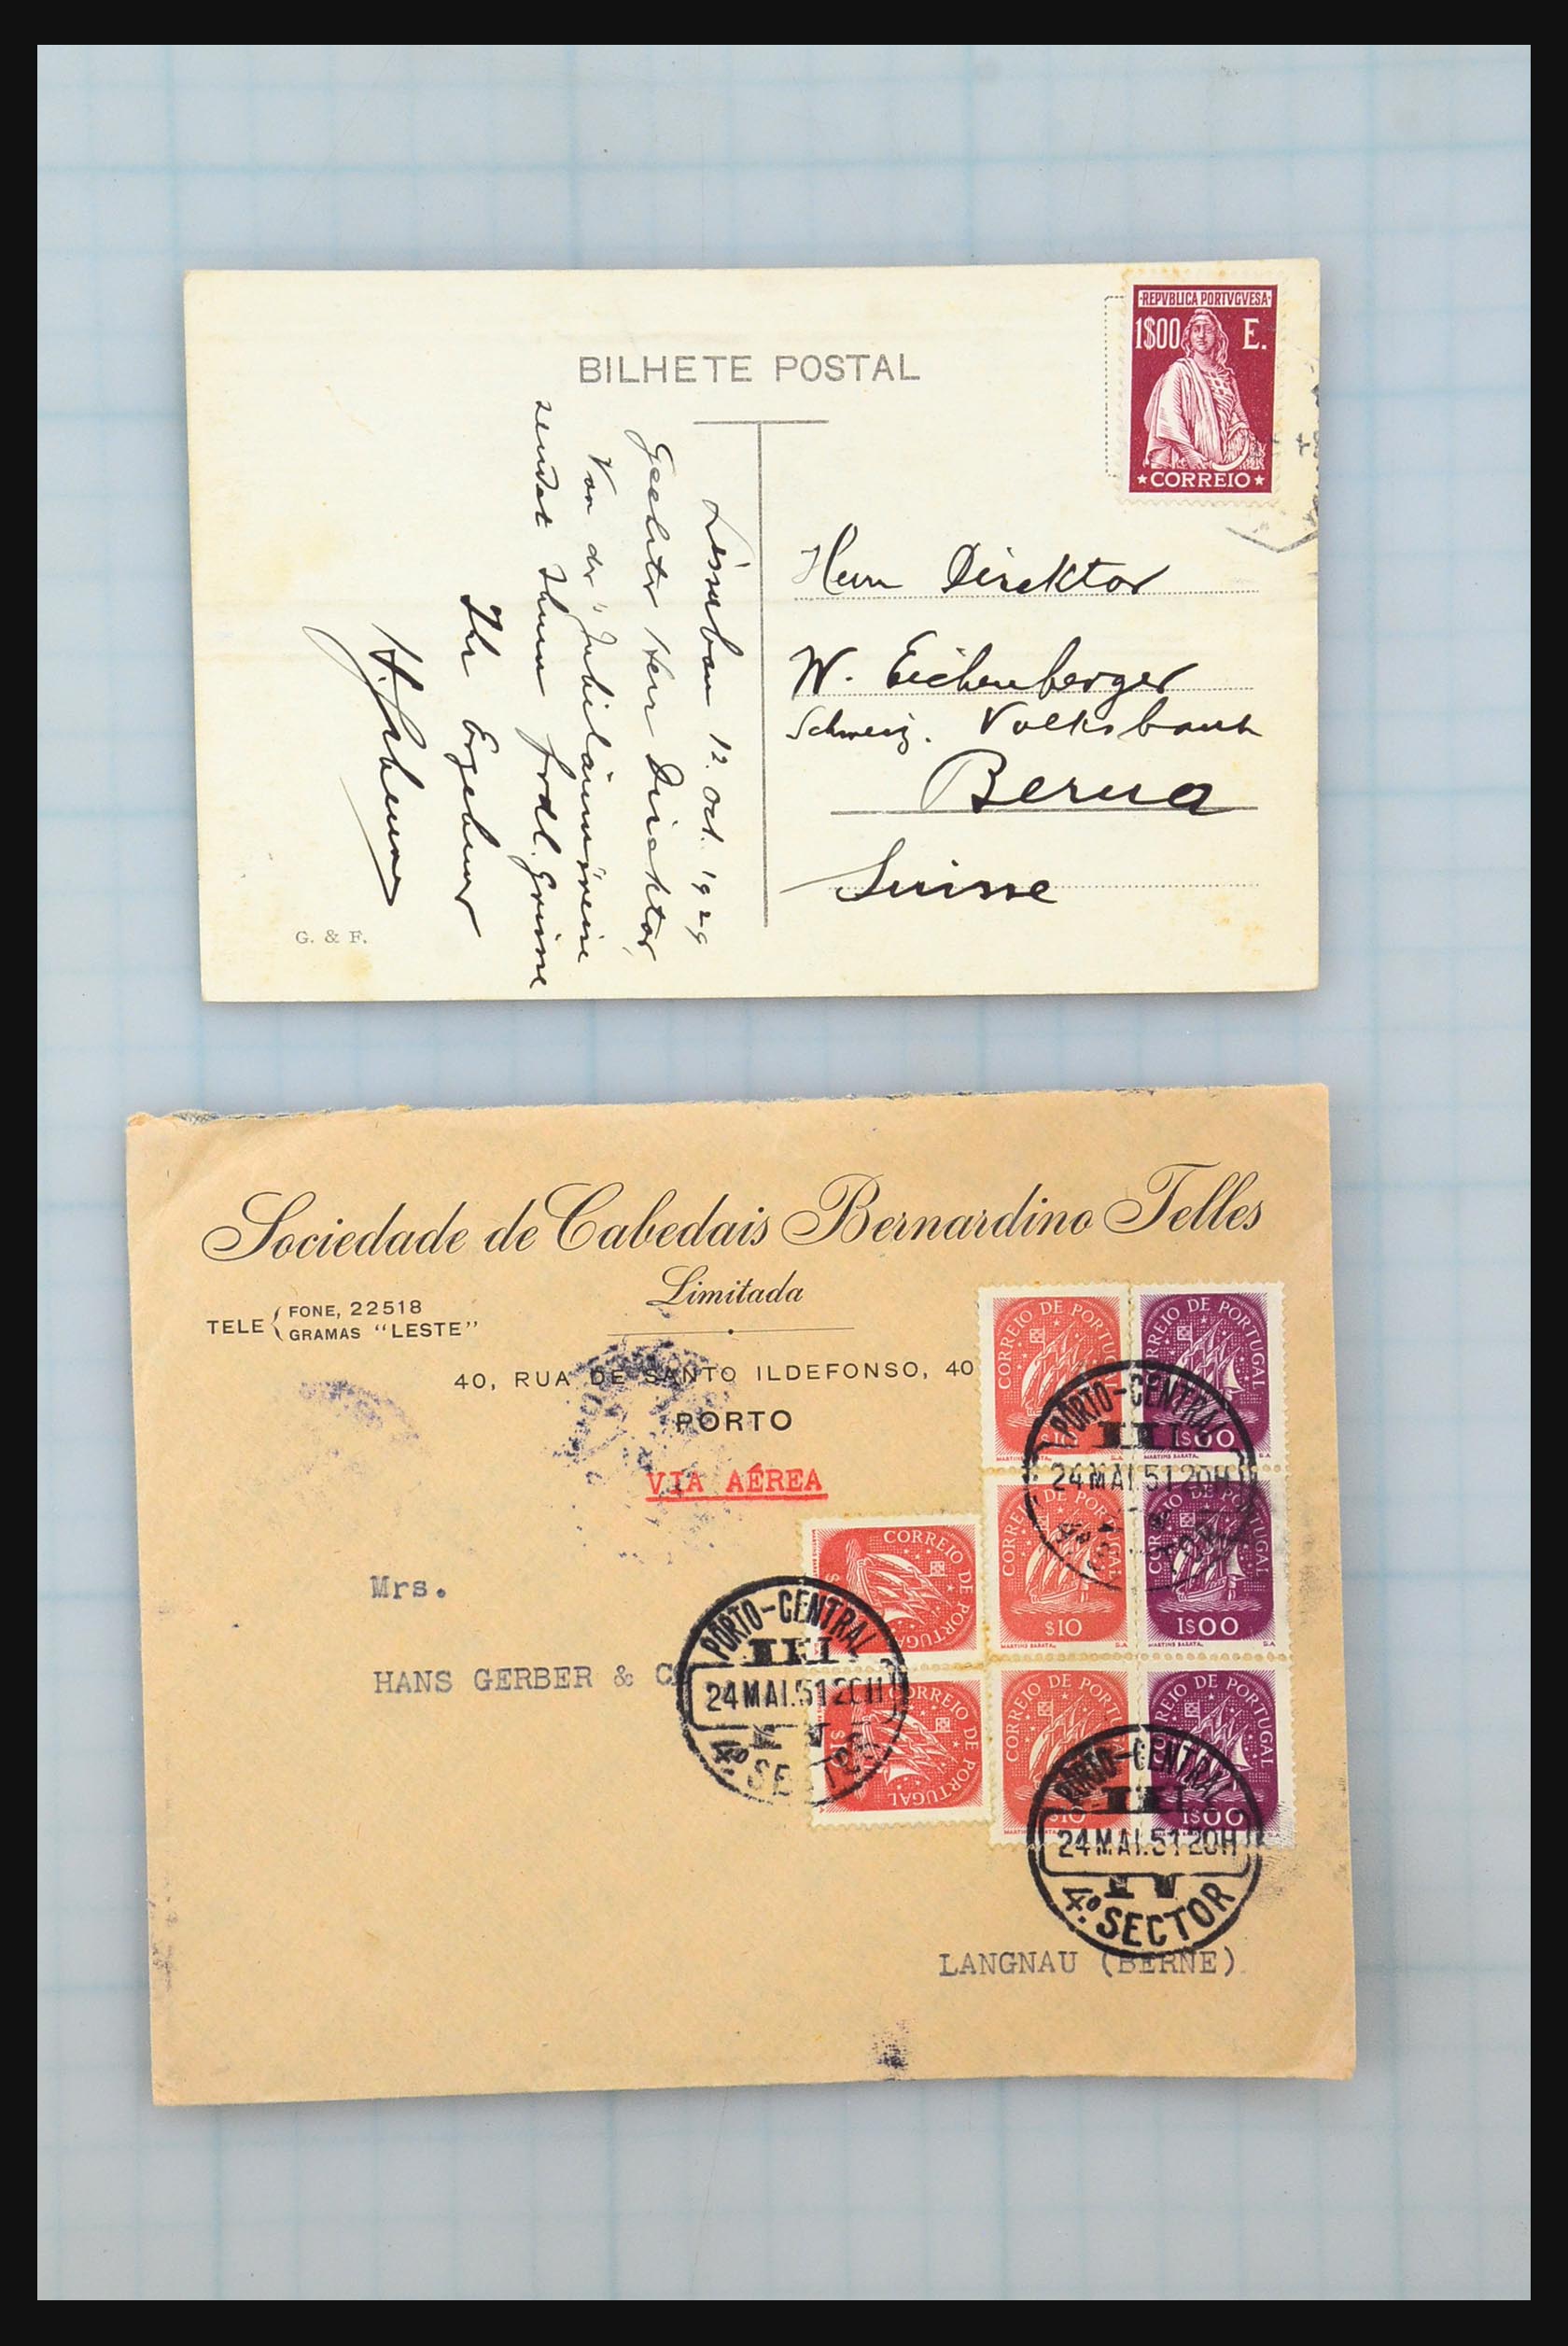 31358 238 - 31358 Portugal/Luxemburg/Greece covers 1880-1960.